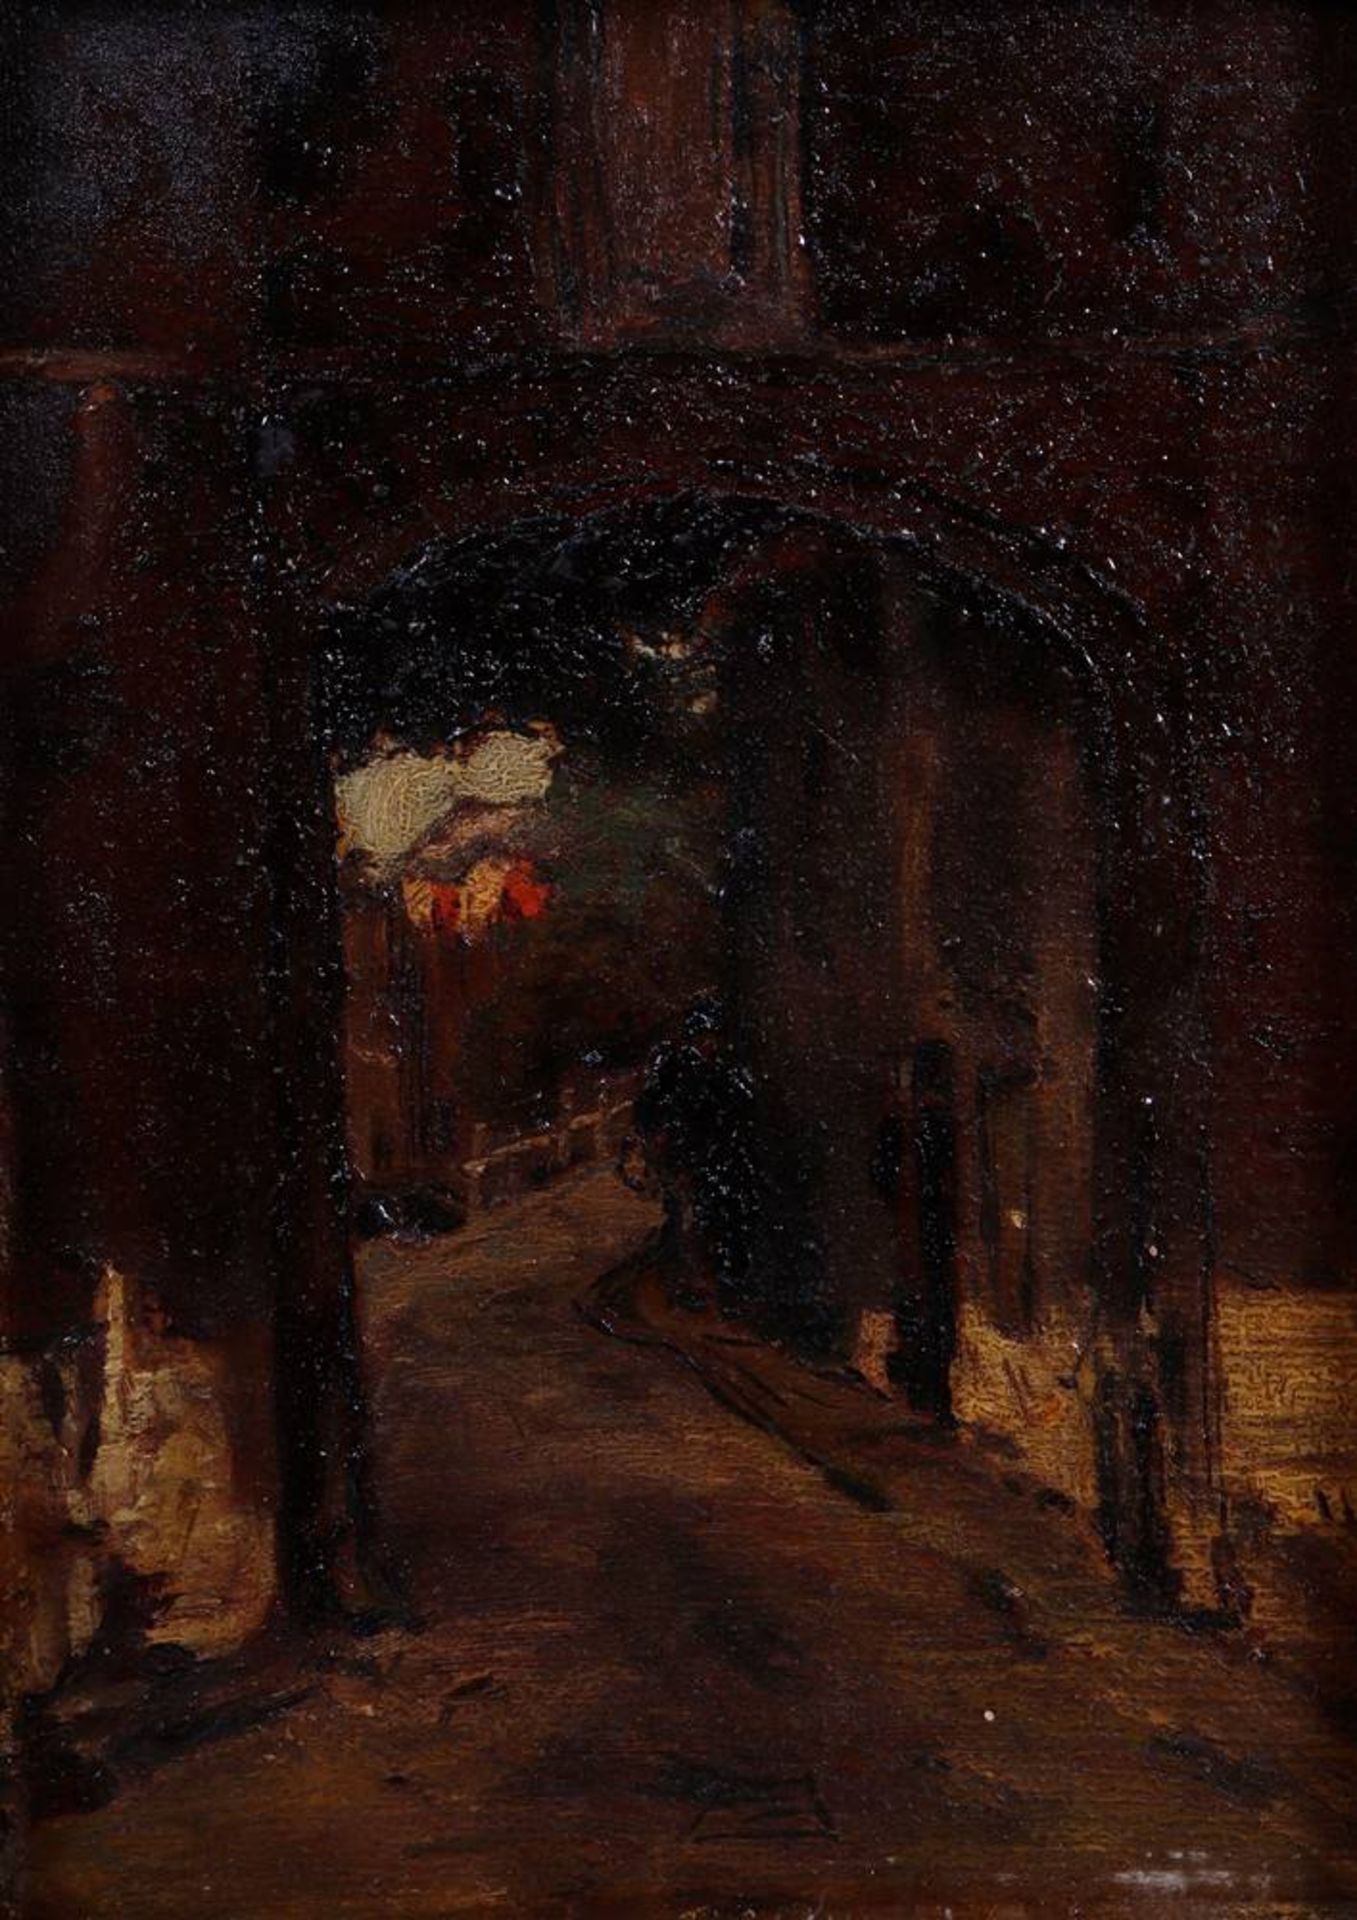 Person walking through an archway, c. 1900 - Image 2 of 3